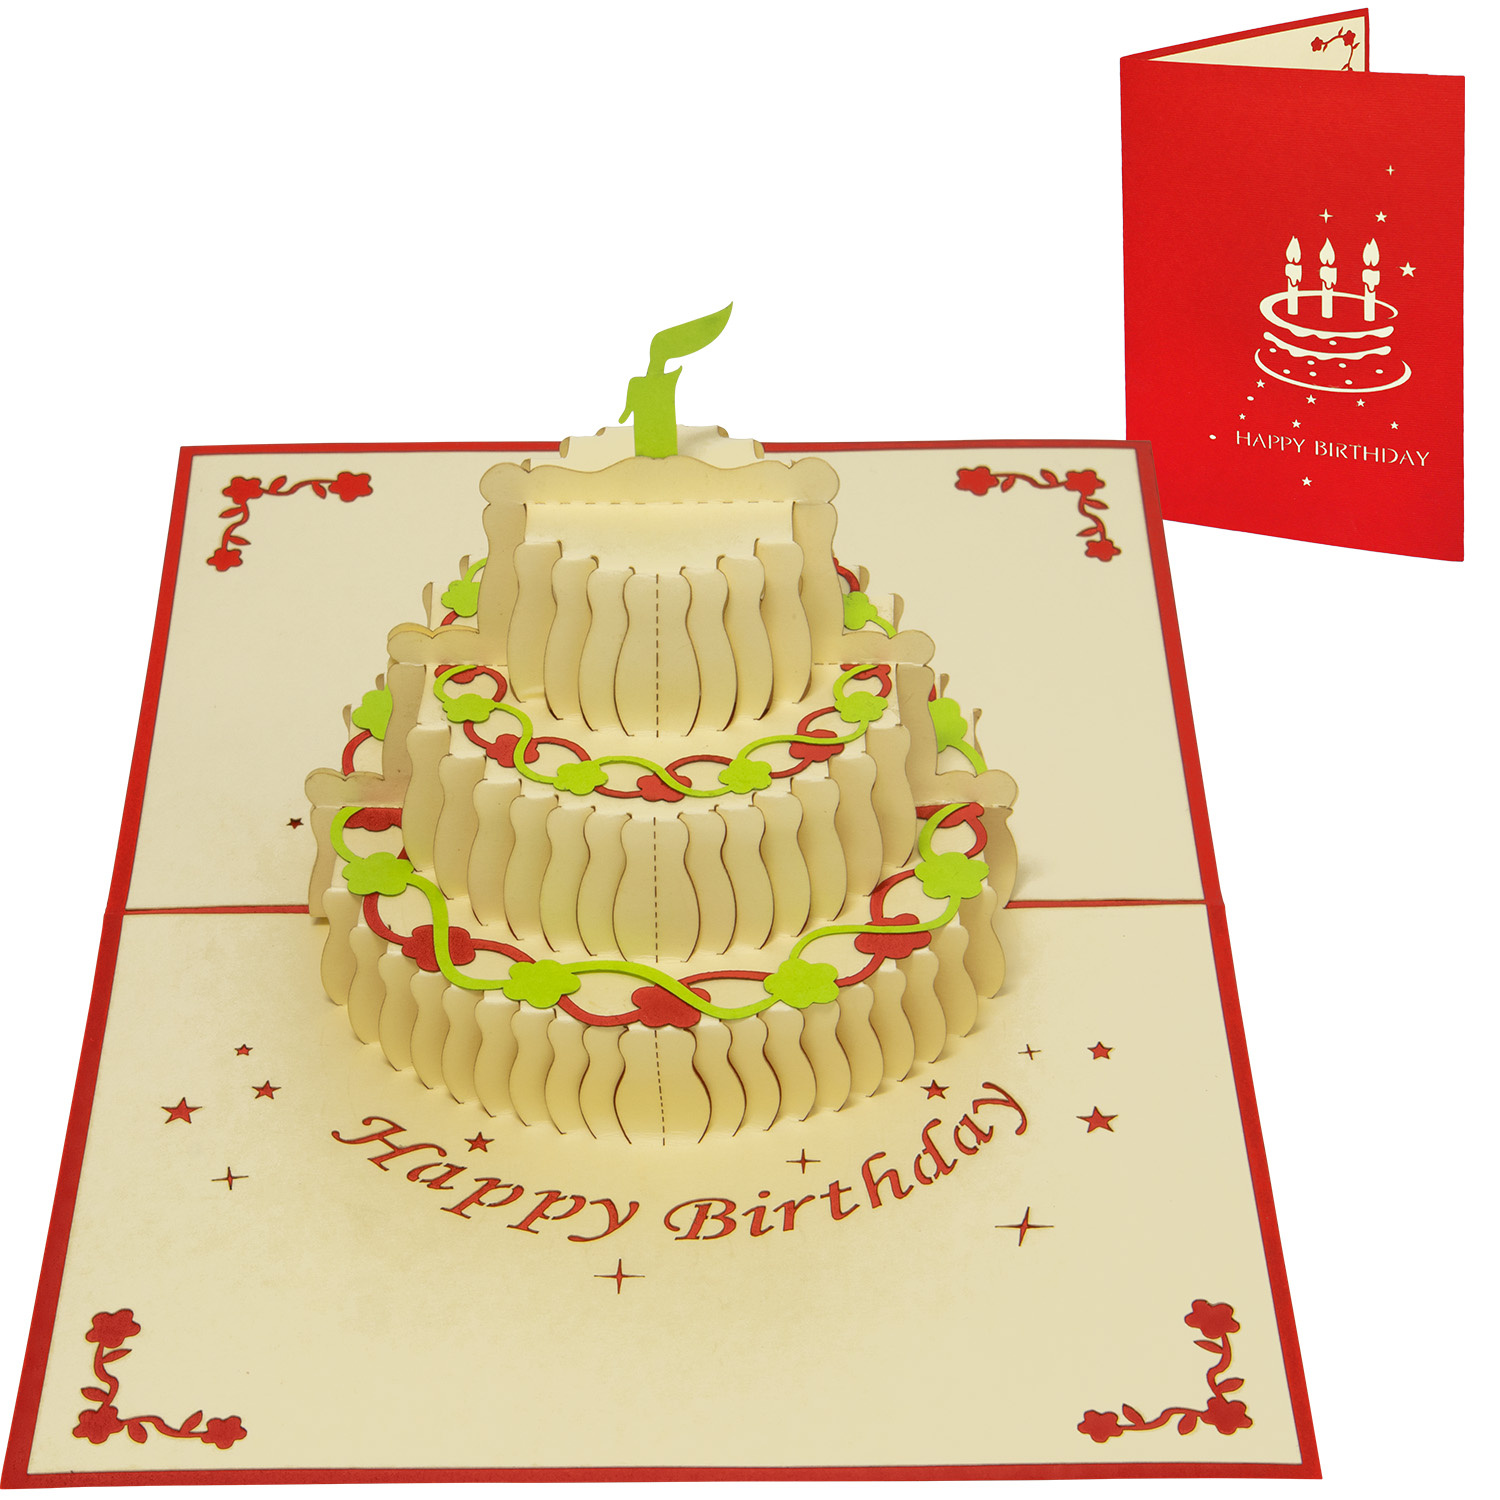 LINPOPUP Pop Up 3D Card, Birthday Card, Congratulations Card Voucher, Party Invitation, Cake Candle, LINPopUp®, N13